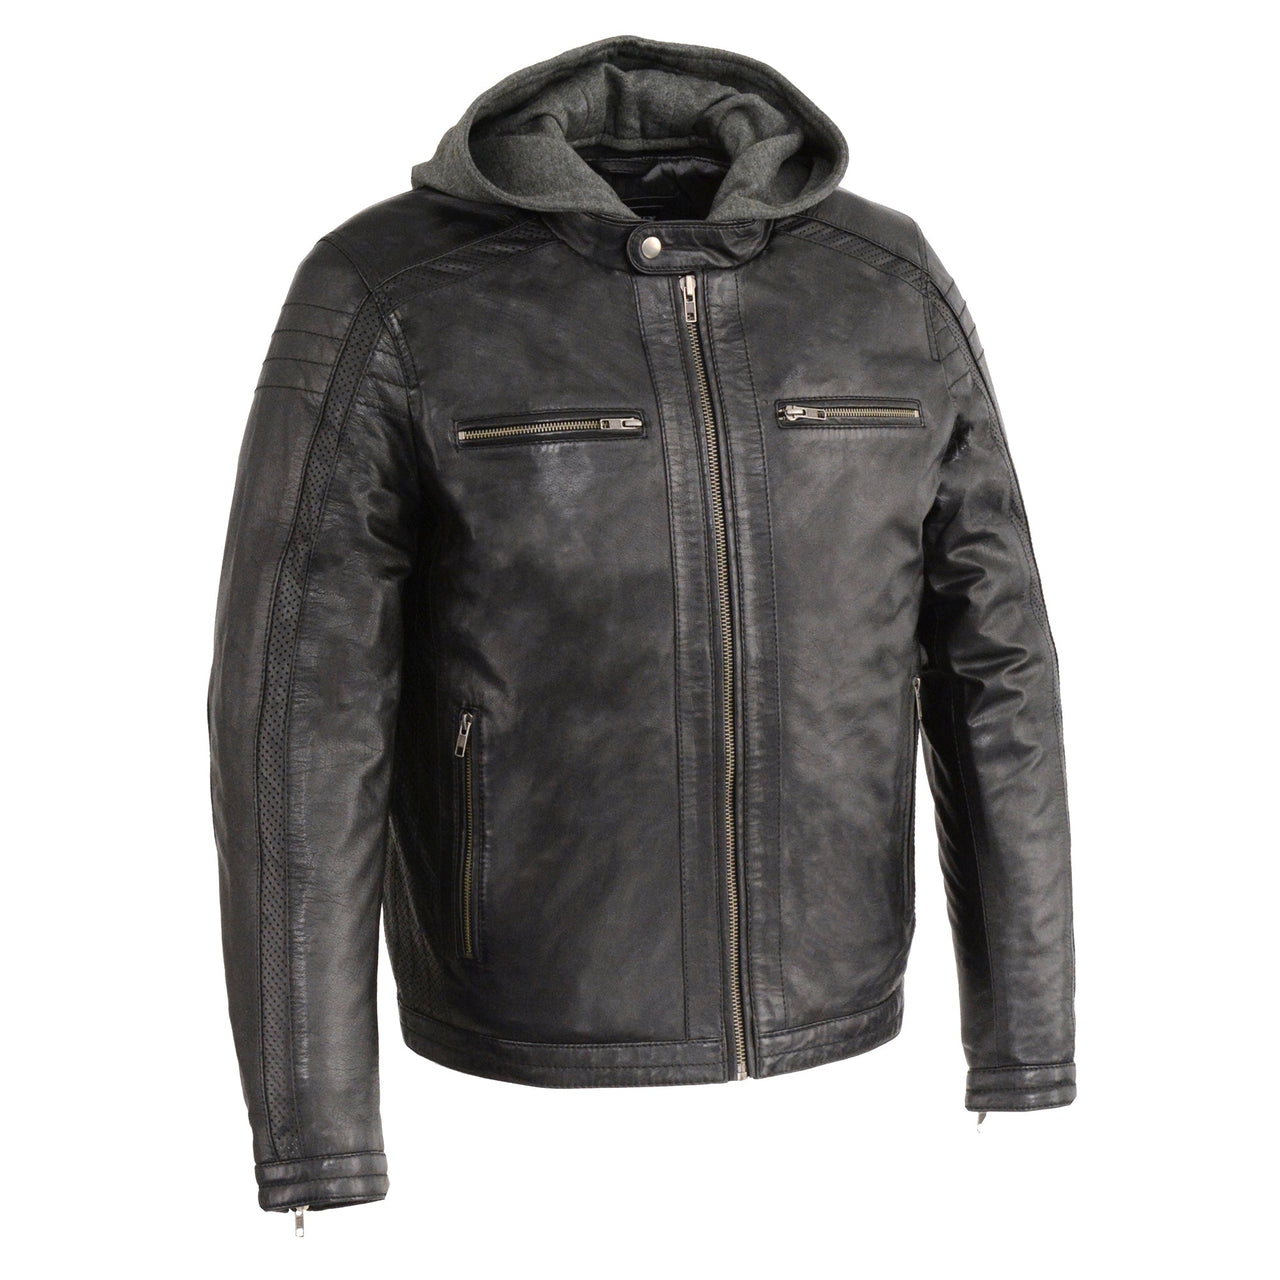 Men's Zipper Front Leather Jacket w/ Removable Hood - HighwayLeather